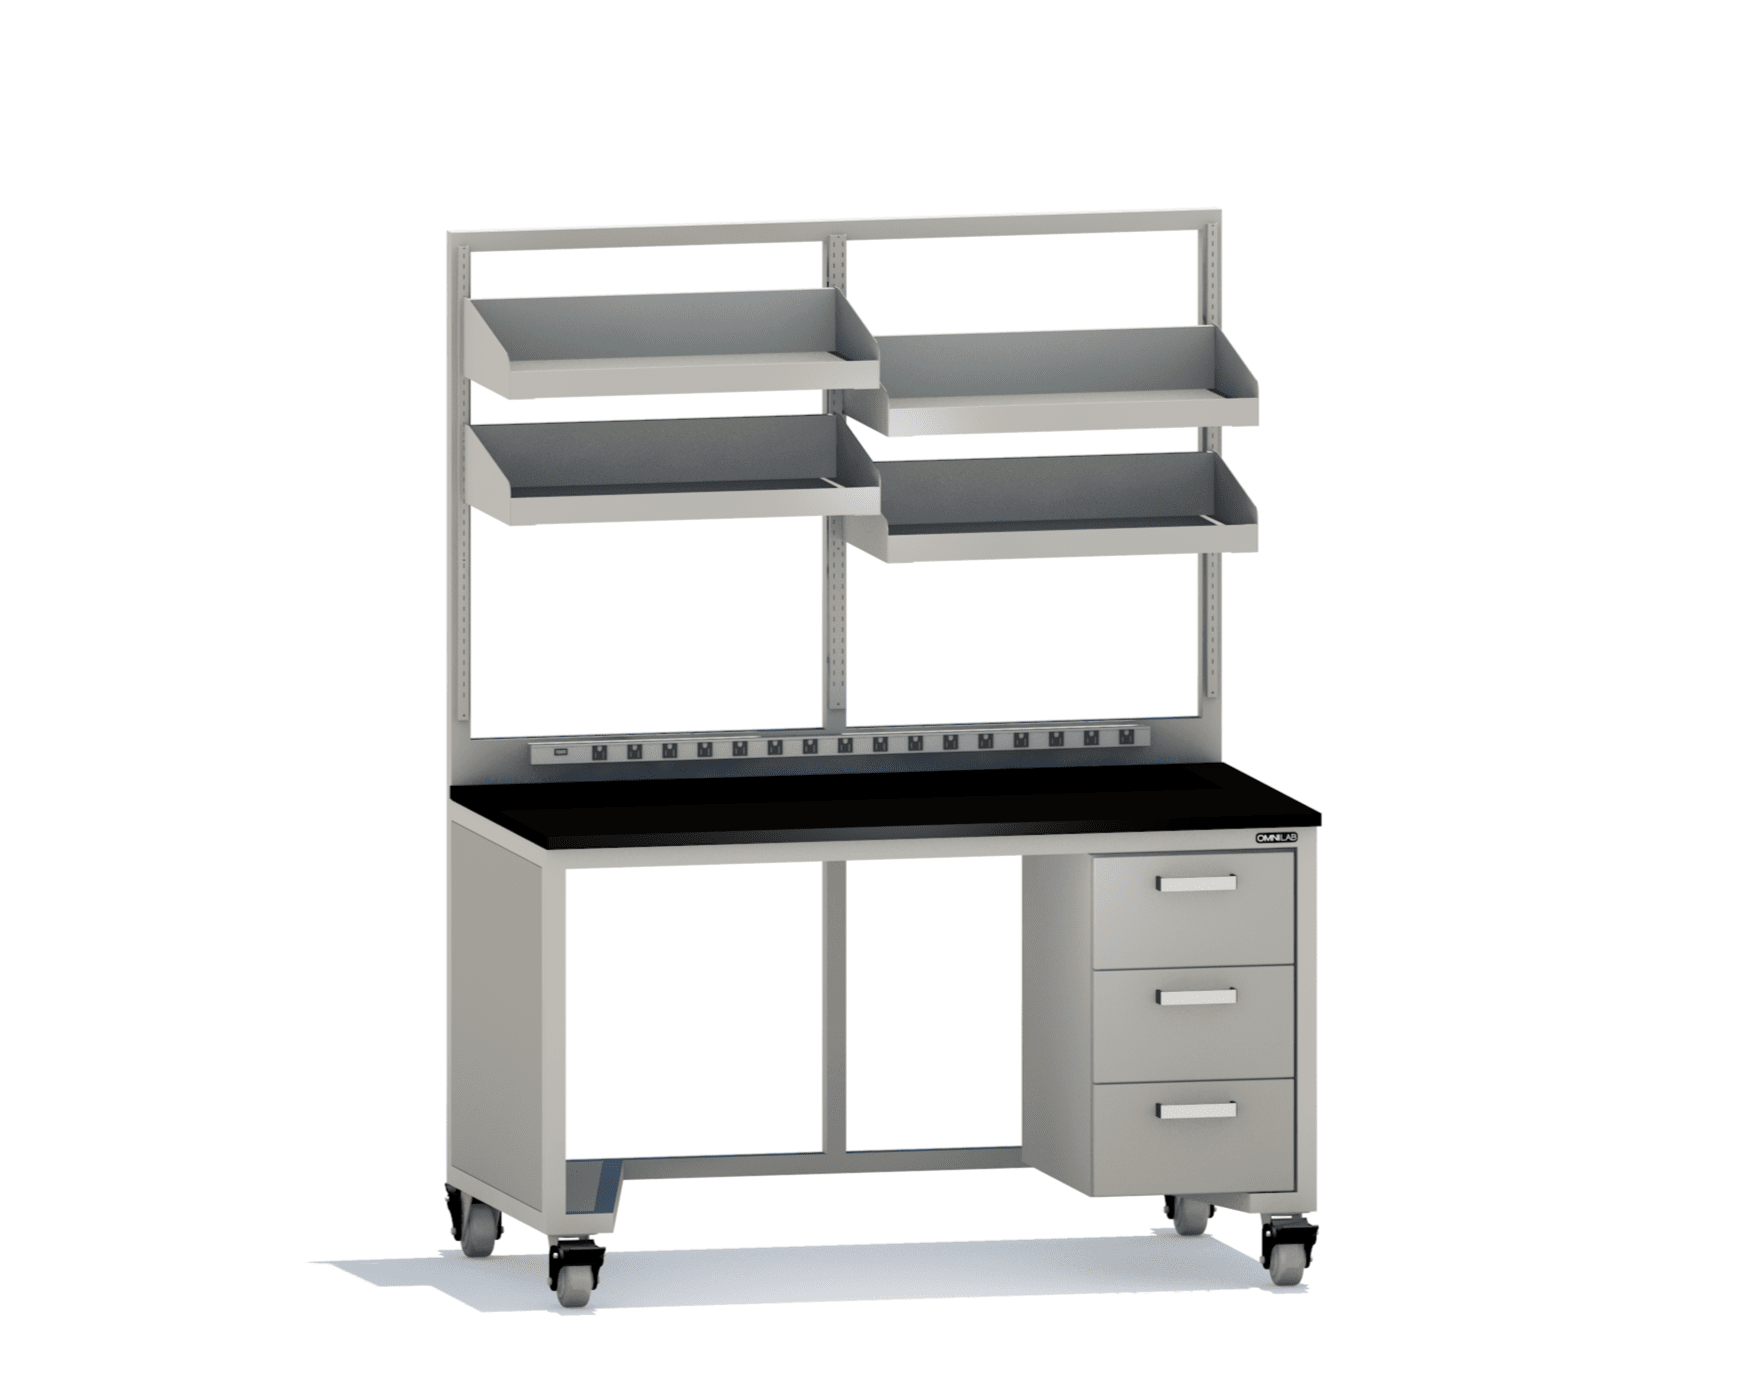 Core Workstation - series four Workstations OMNI Lab Solutions 60" wide 